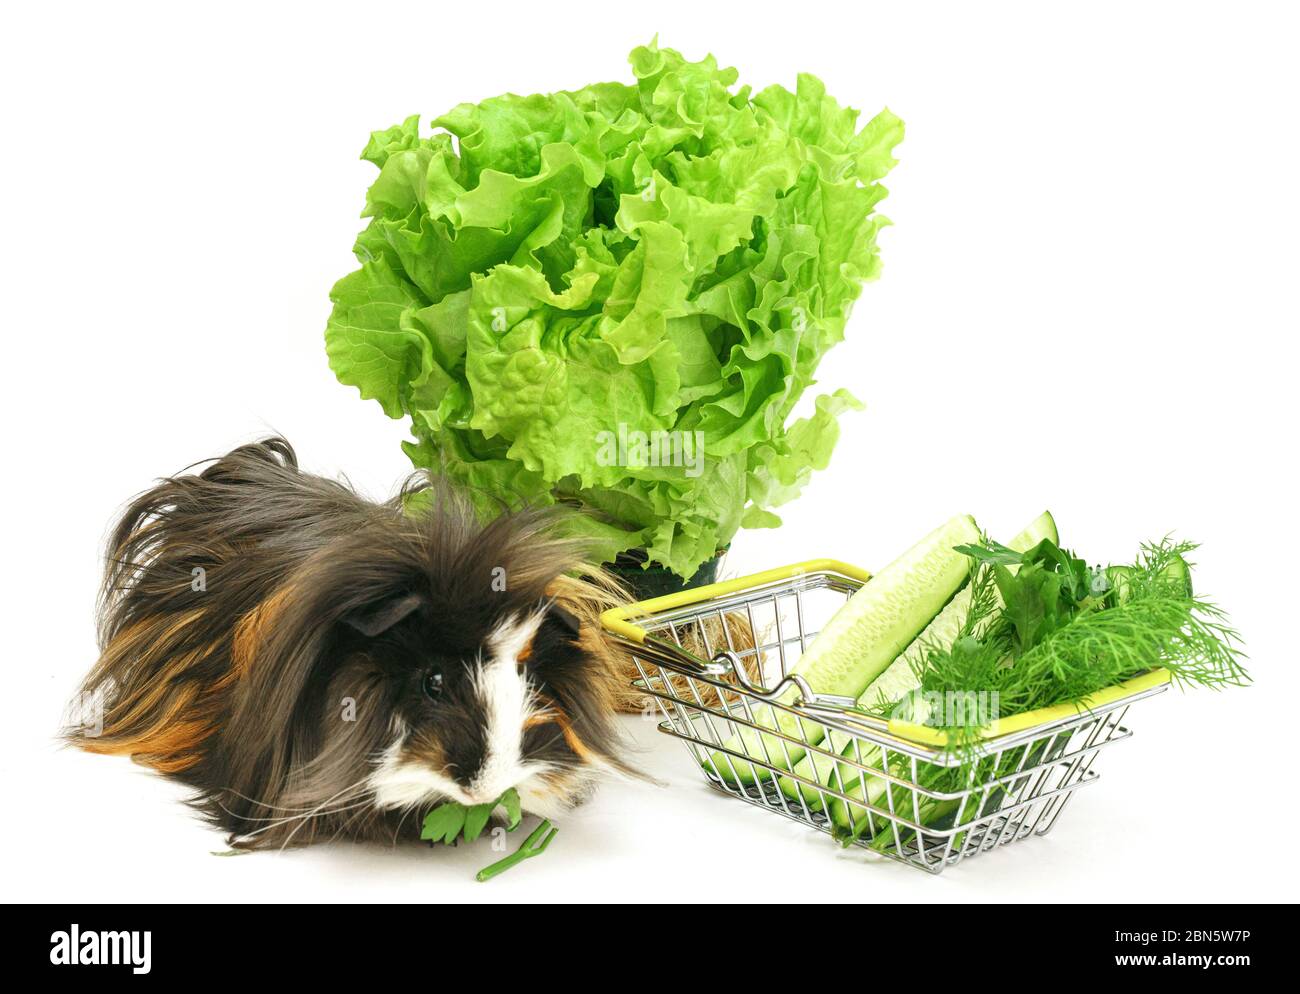 Funny shaggy sheba guinea pig eats from a shopping basket filled with purchased greens on a white background. Pets, care, food, buying pets Stock Photo